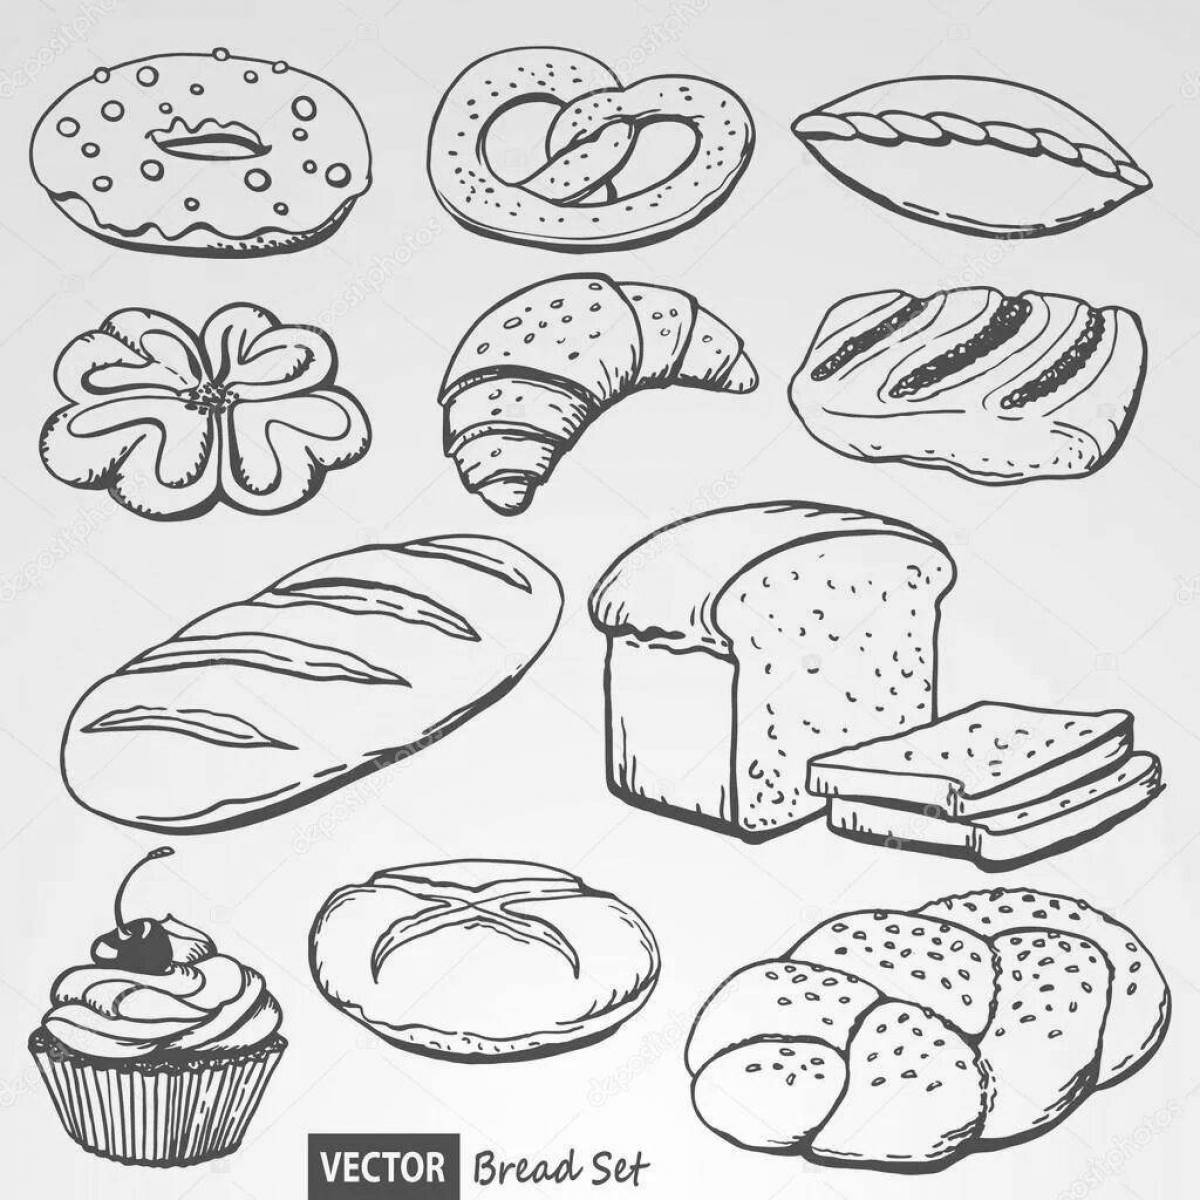 Coloring Page of Preschool Bakery Products